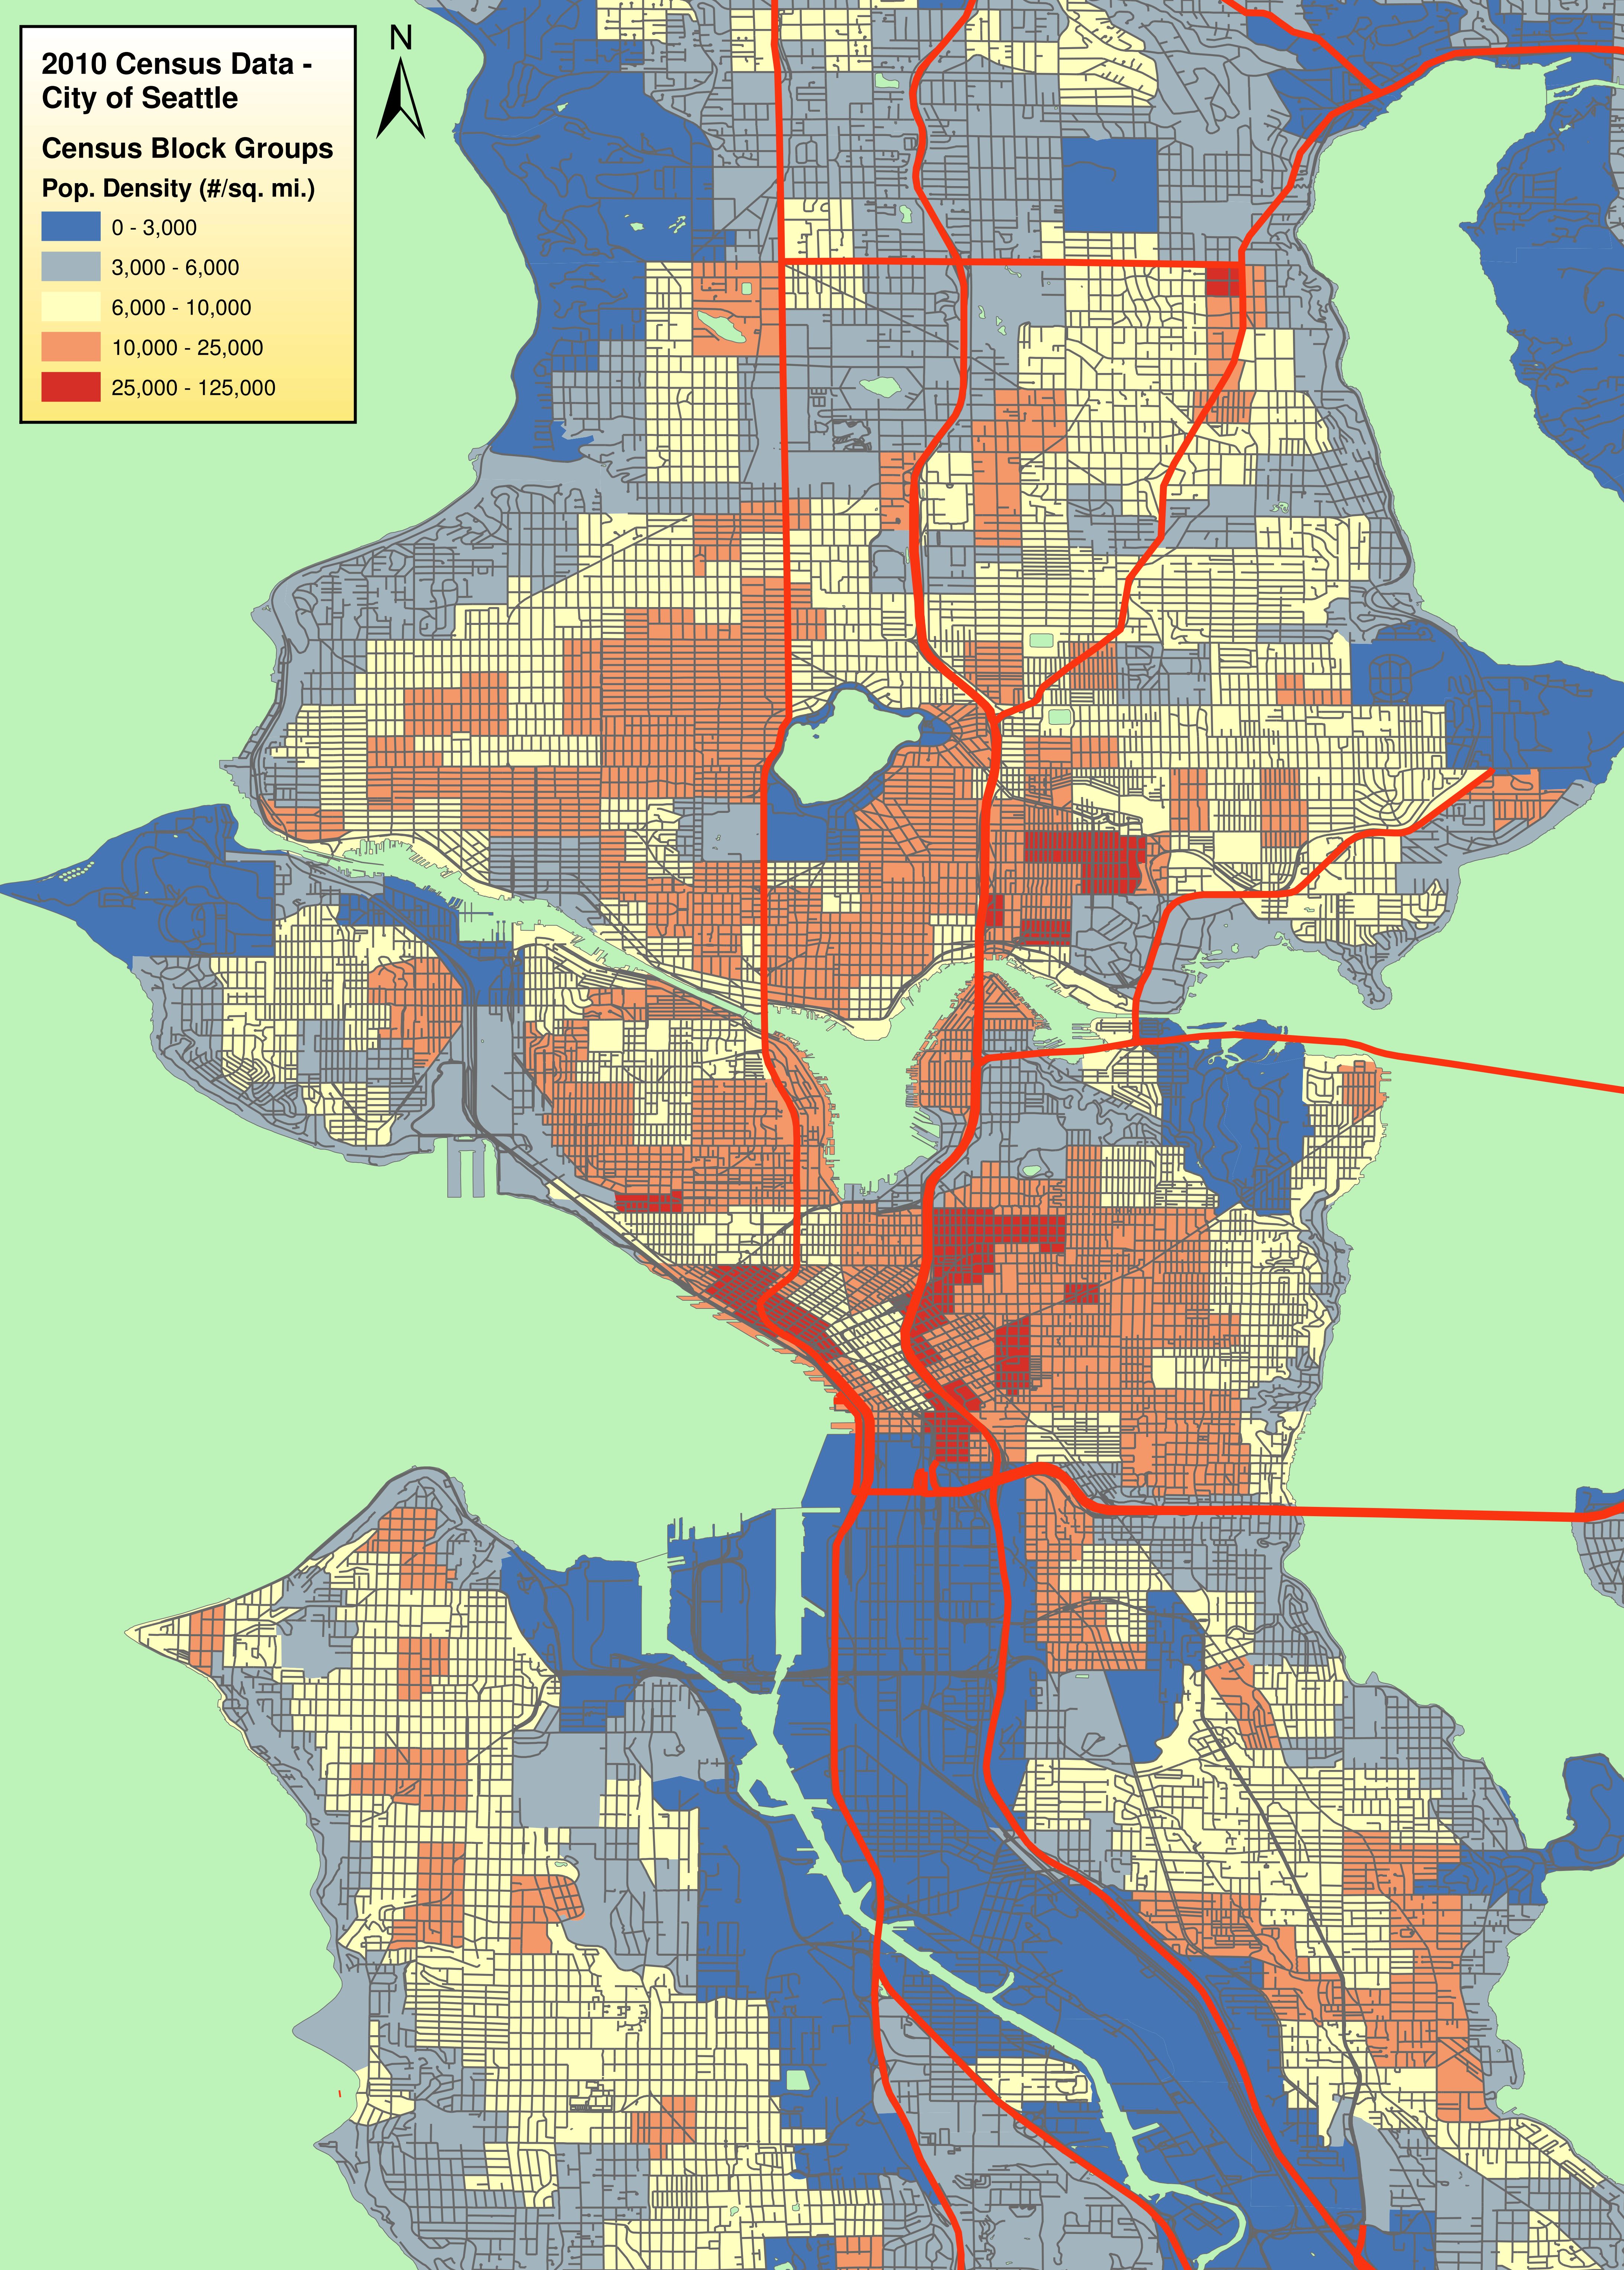 Chad Newton at Build The City blog made this nifty density map based on 2010 census data. As you can see, West Seattle has only a few sections in the orange (10,000 to 25,000) density level. (Chad Newton)